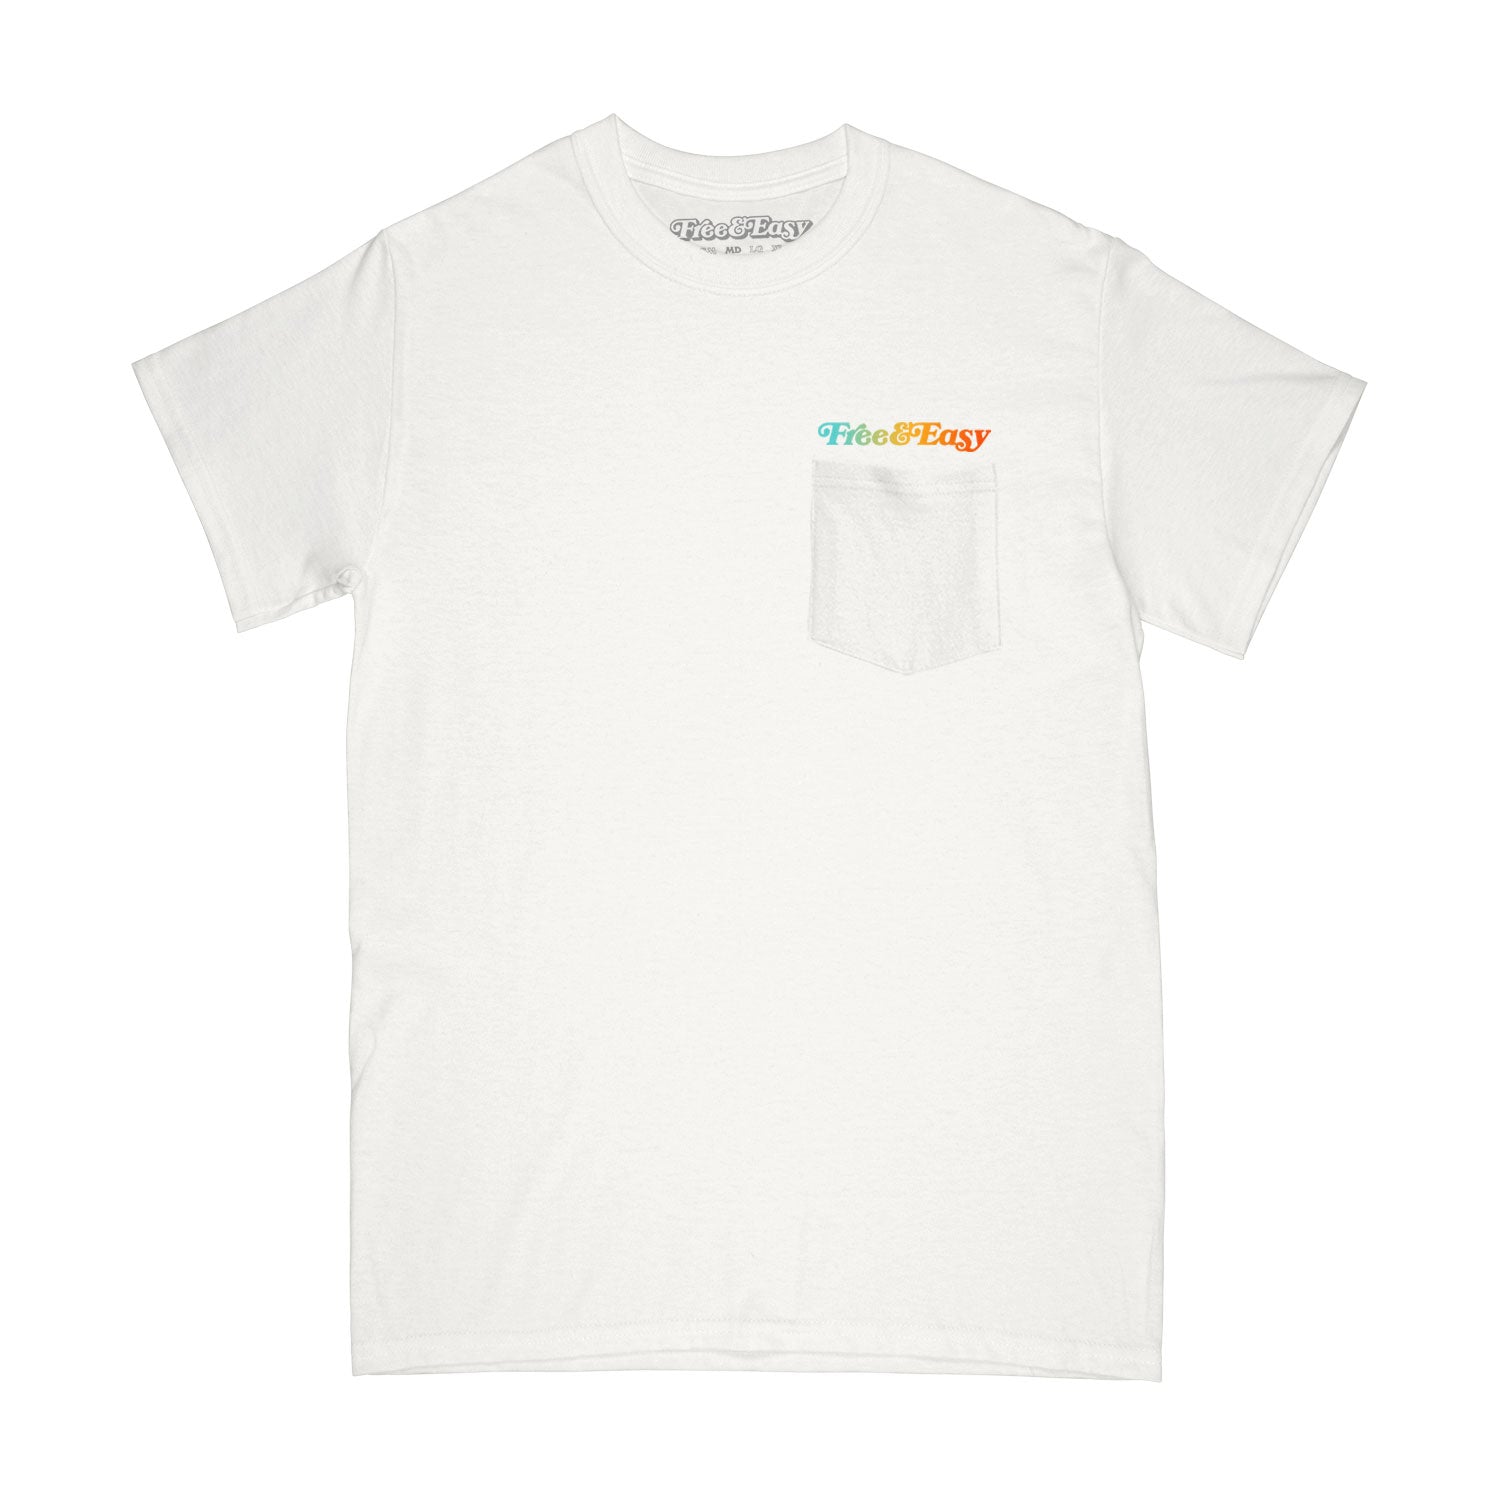 Venice Shop SS Pocket Tee in white with multicolor graphic design on a white background -Free & Easy